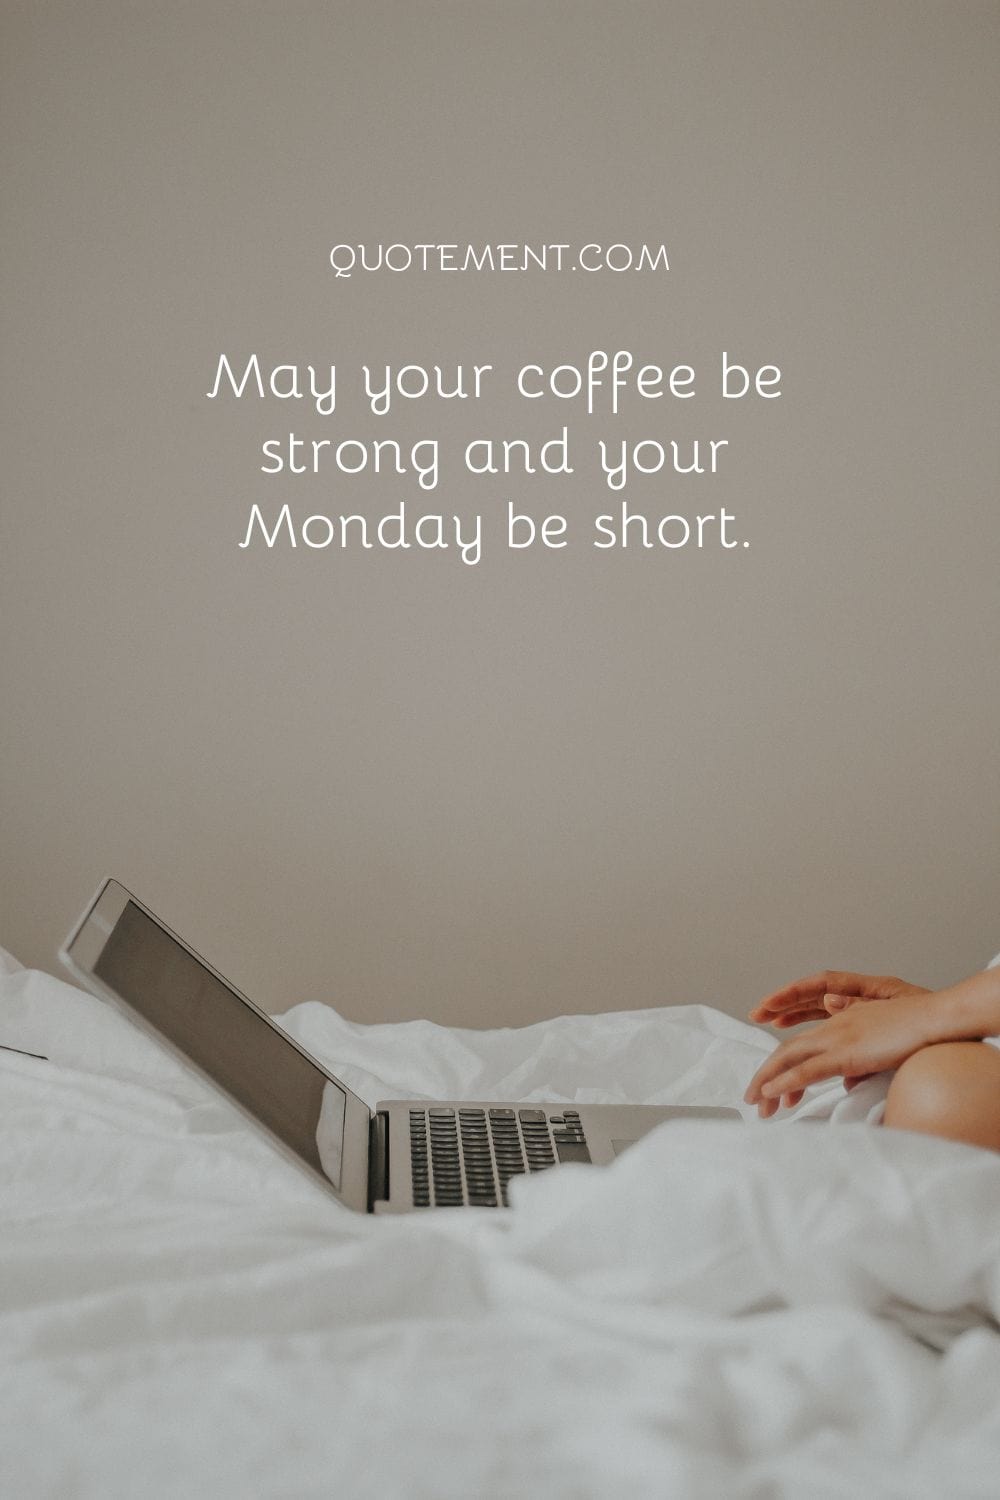 May your coffee be strong and your Monday be short